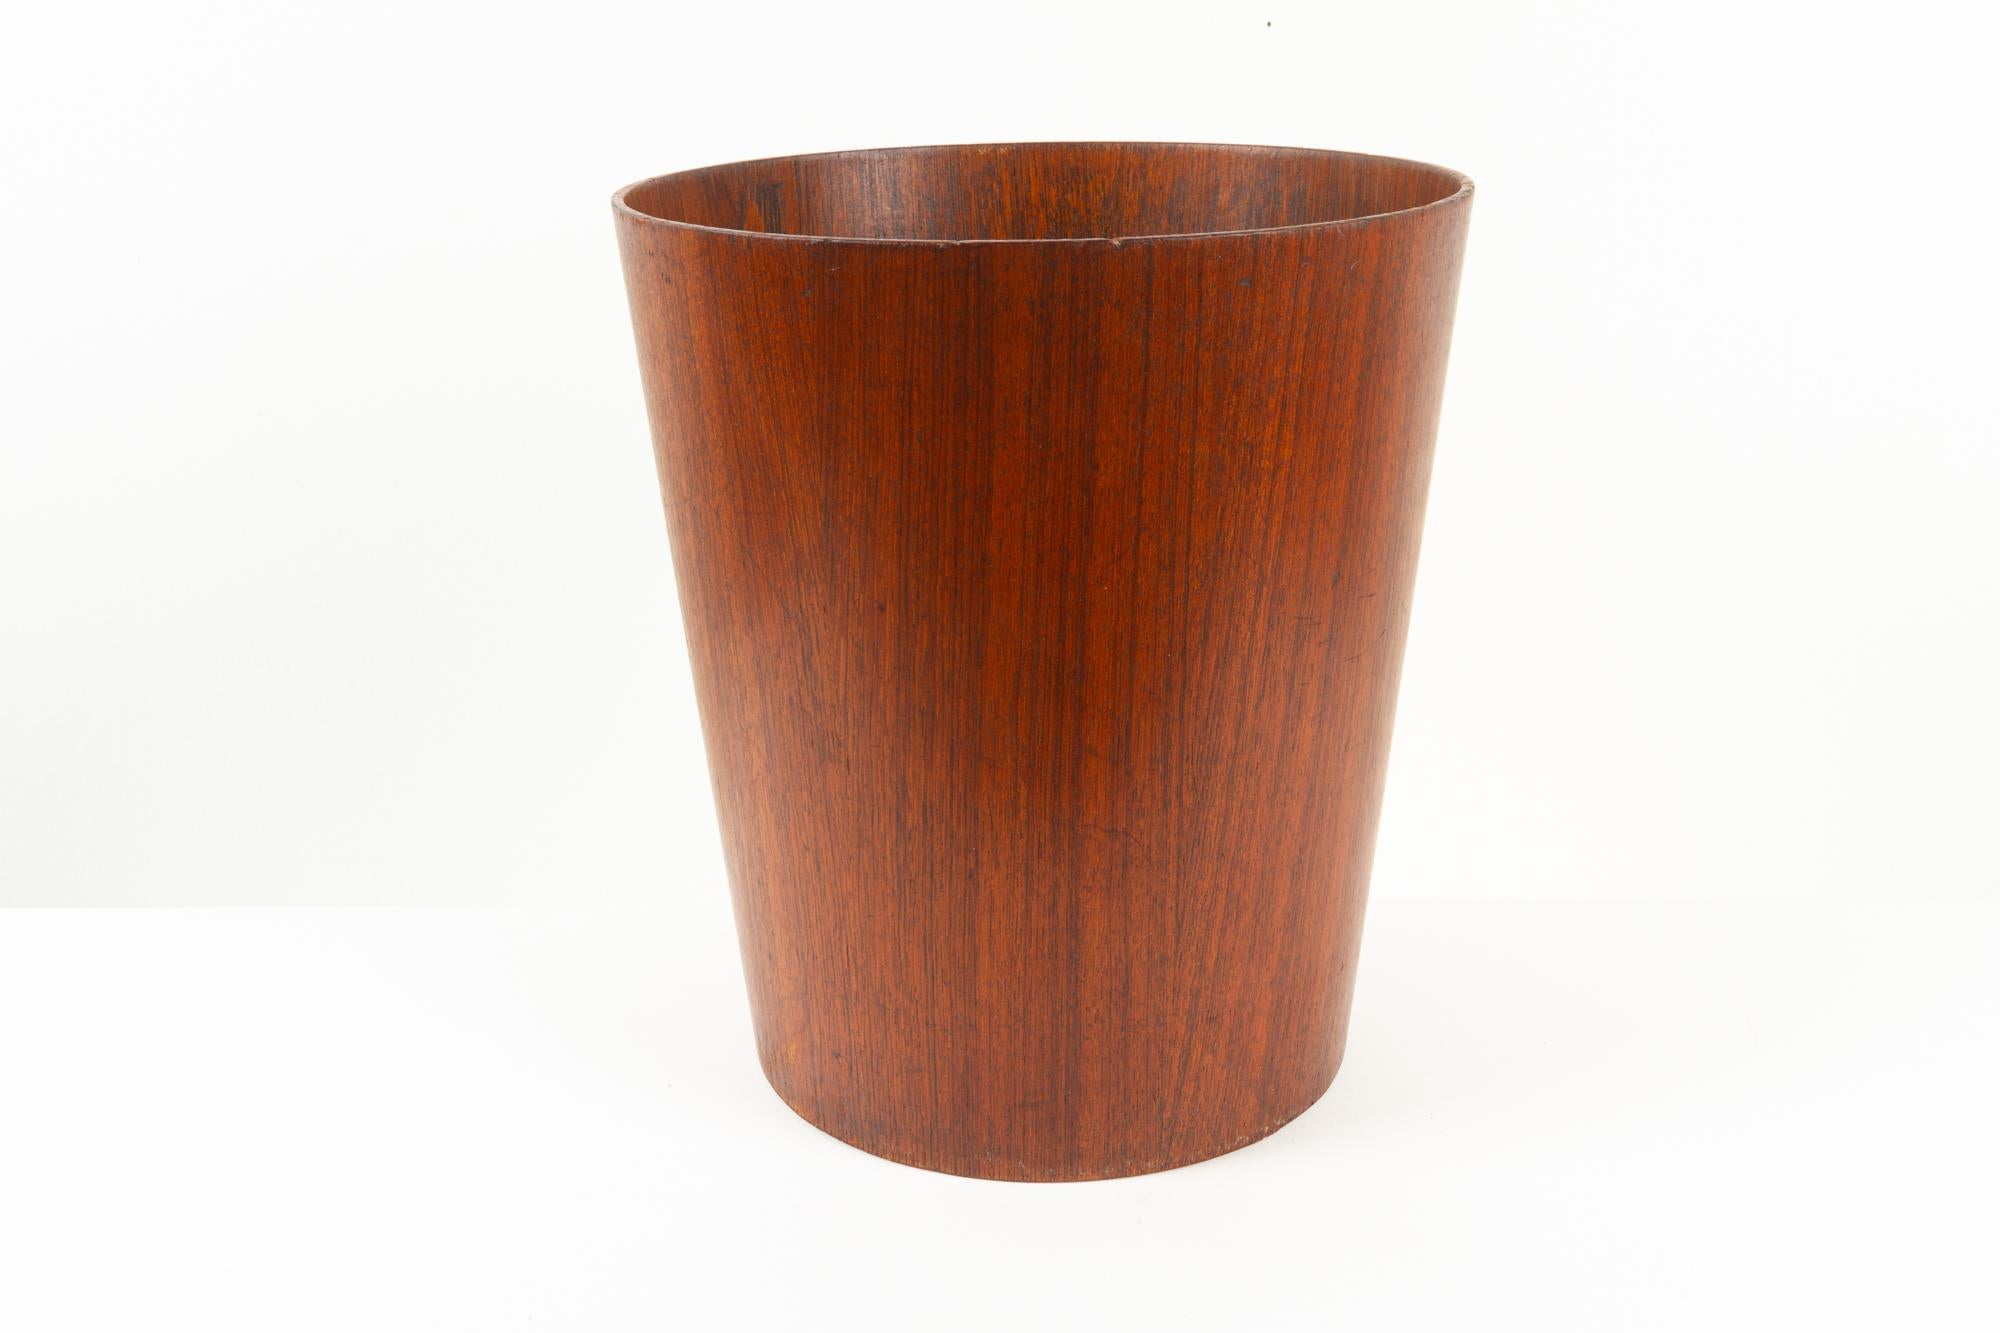 Swedish bucket in teak by Martin Åberg for Servex 1960s.
Vintage Scandinavian Modern round waste paper basket in teak.
Stamped on the bottom.
Fine vintage condition with normal signs of use. Cleaned and polished.